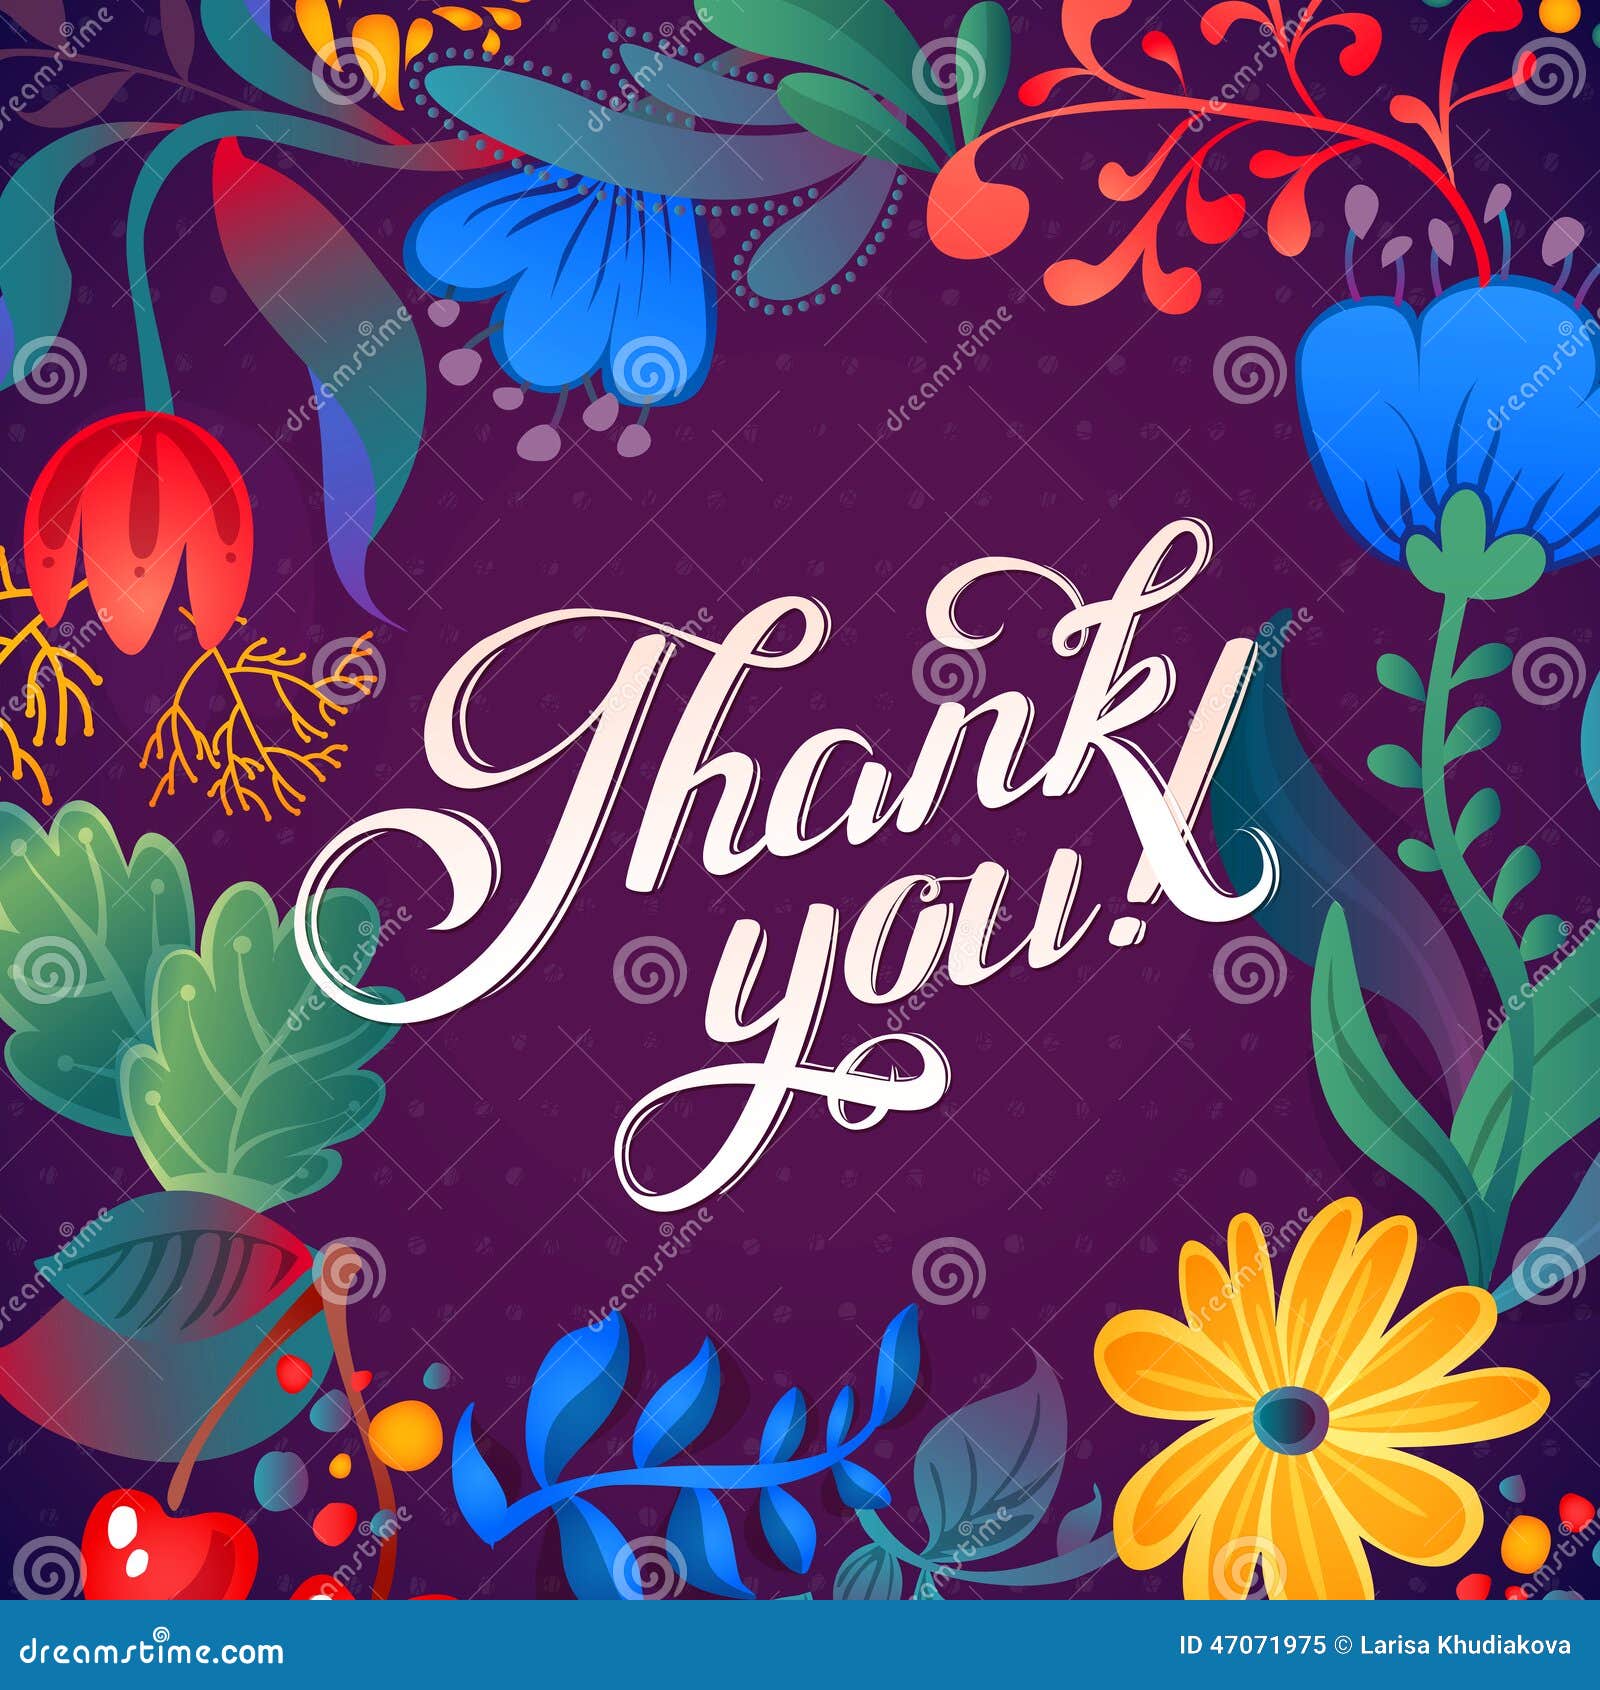 stylish tumblr backgrounds Card Bright You Thank Background Stylish Floral Colors. In